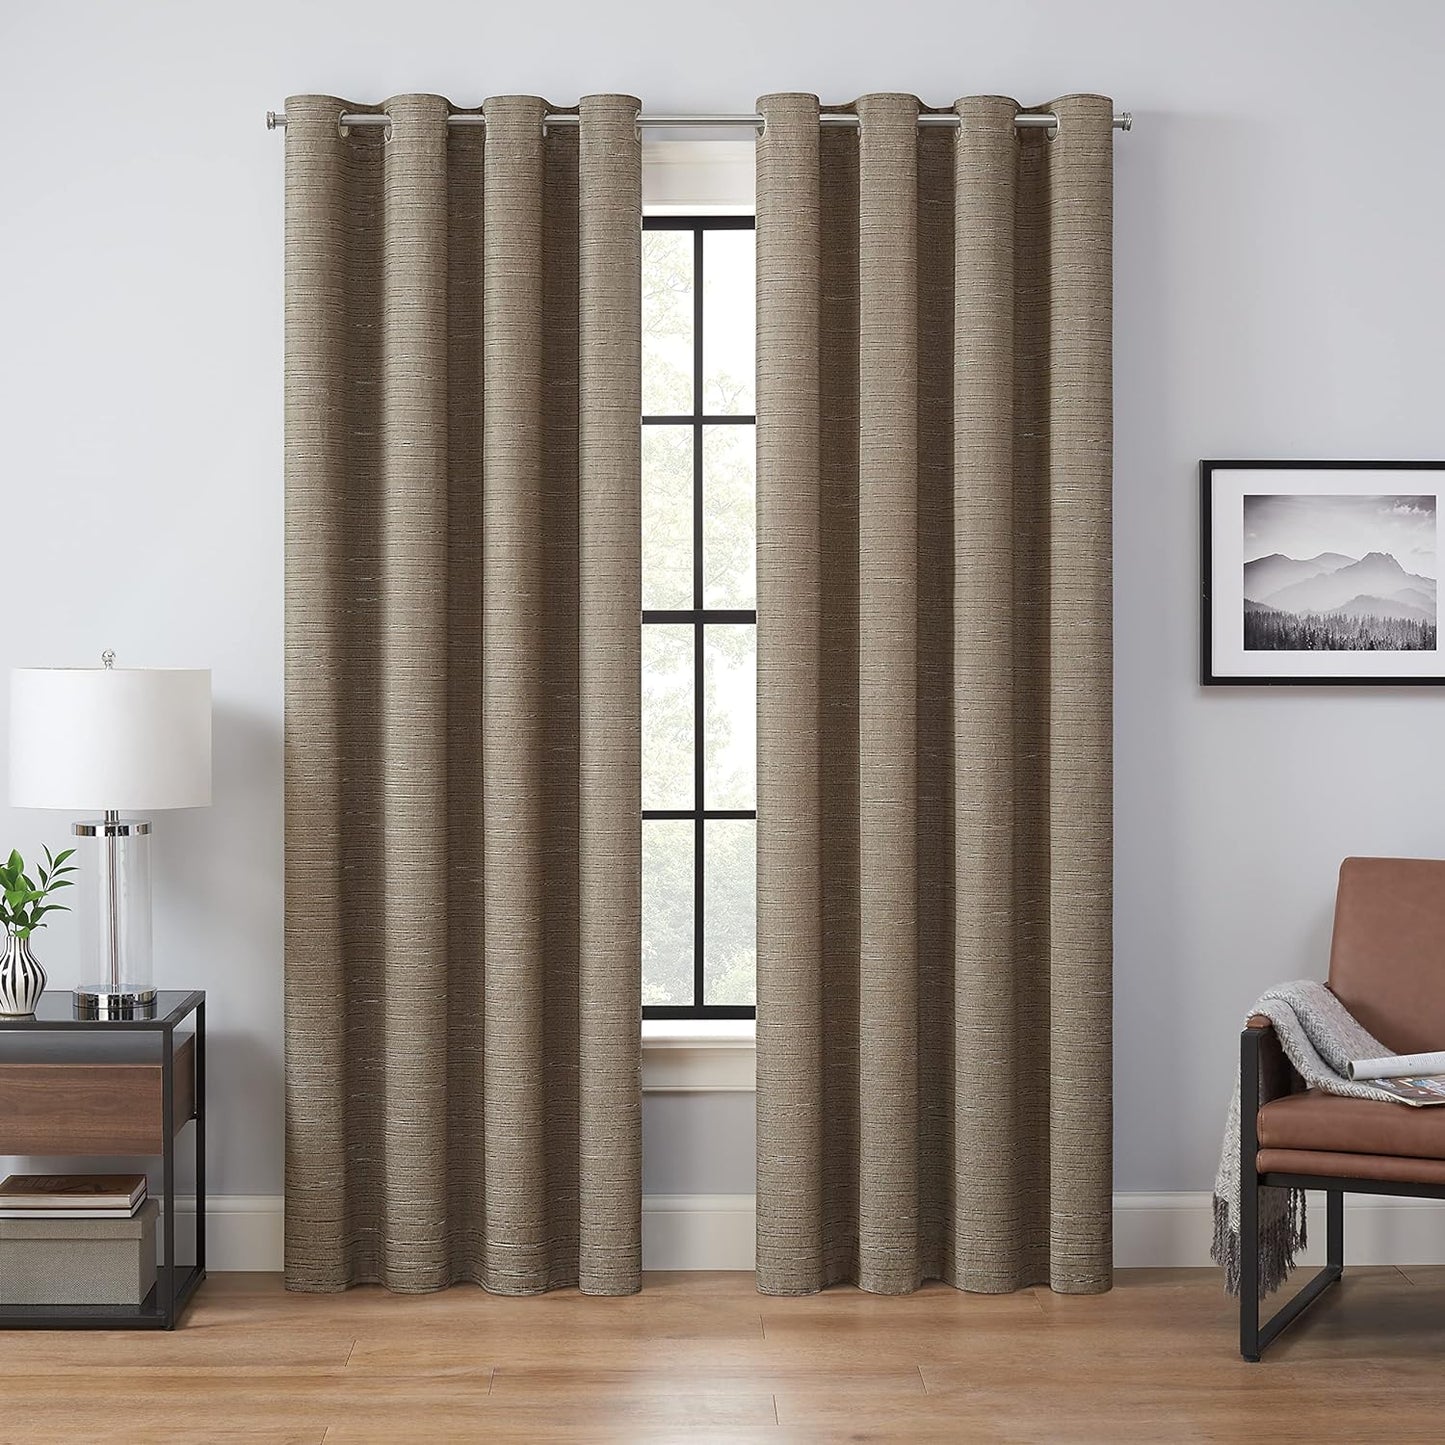 Eclipse Cannes Magnitech 100% Blackout Curtain, Rod Pocket Window Curtain Panel, Seamless Magnetic Closure for Bedroom, Living Room or Nursery, 63 in Long X 40 in Wide, (1 Panel), Natural/ Linen  KEECO Mocha Grommet 50X63